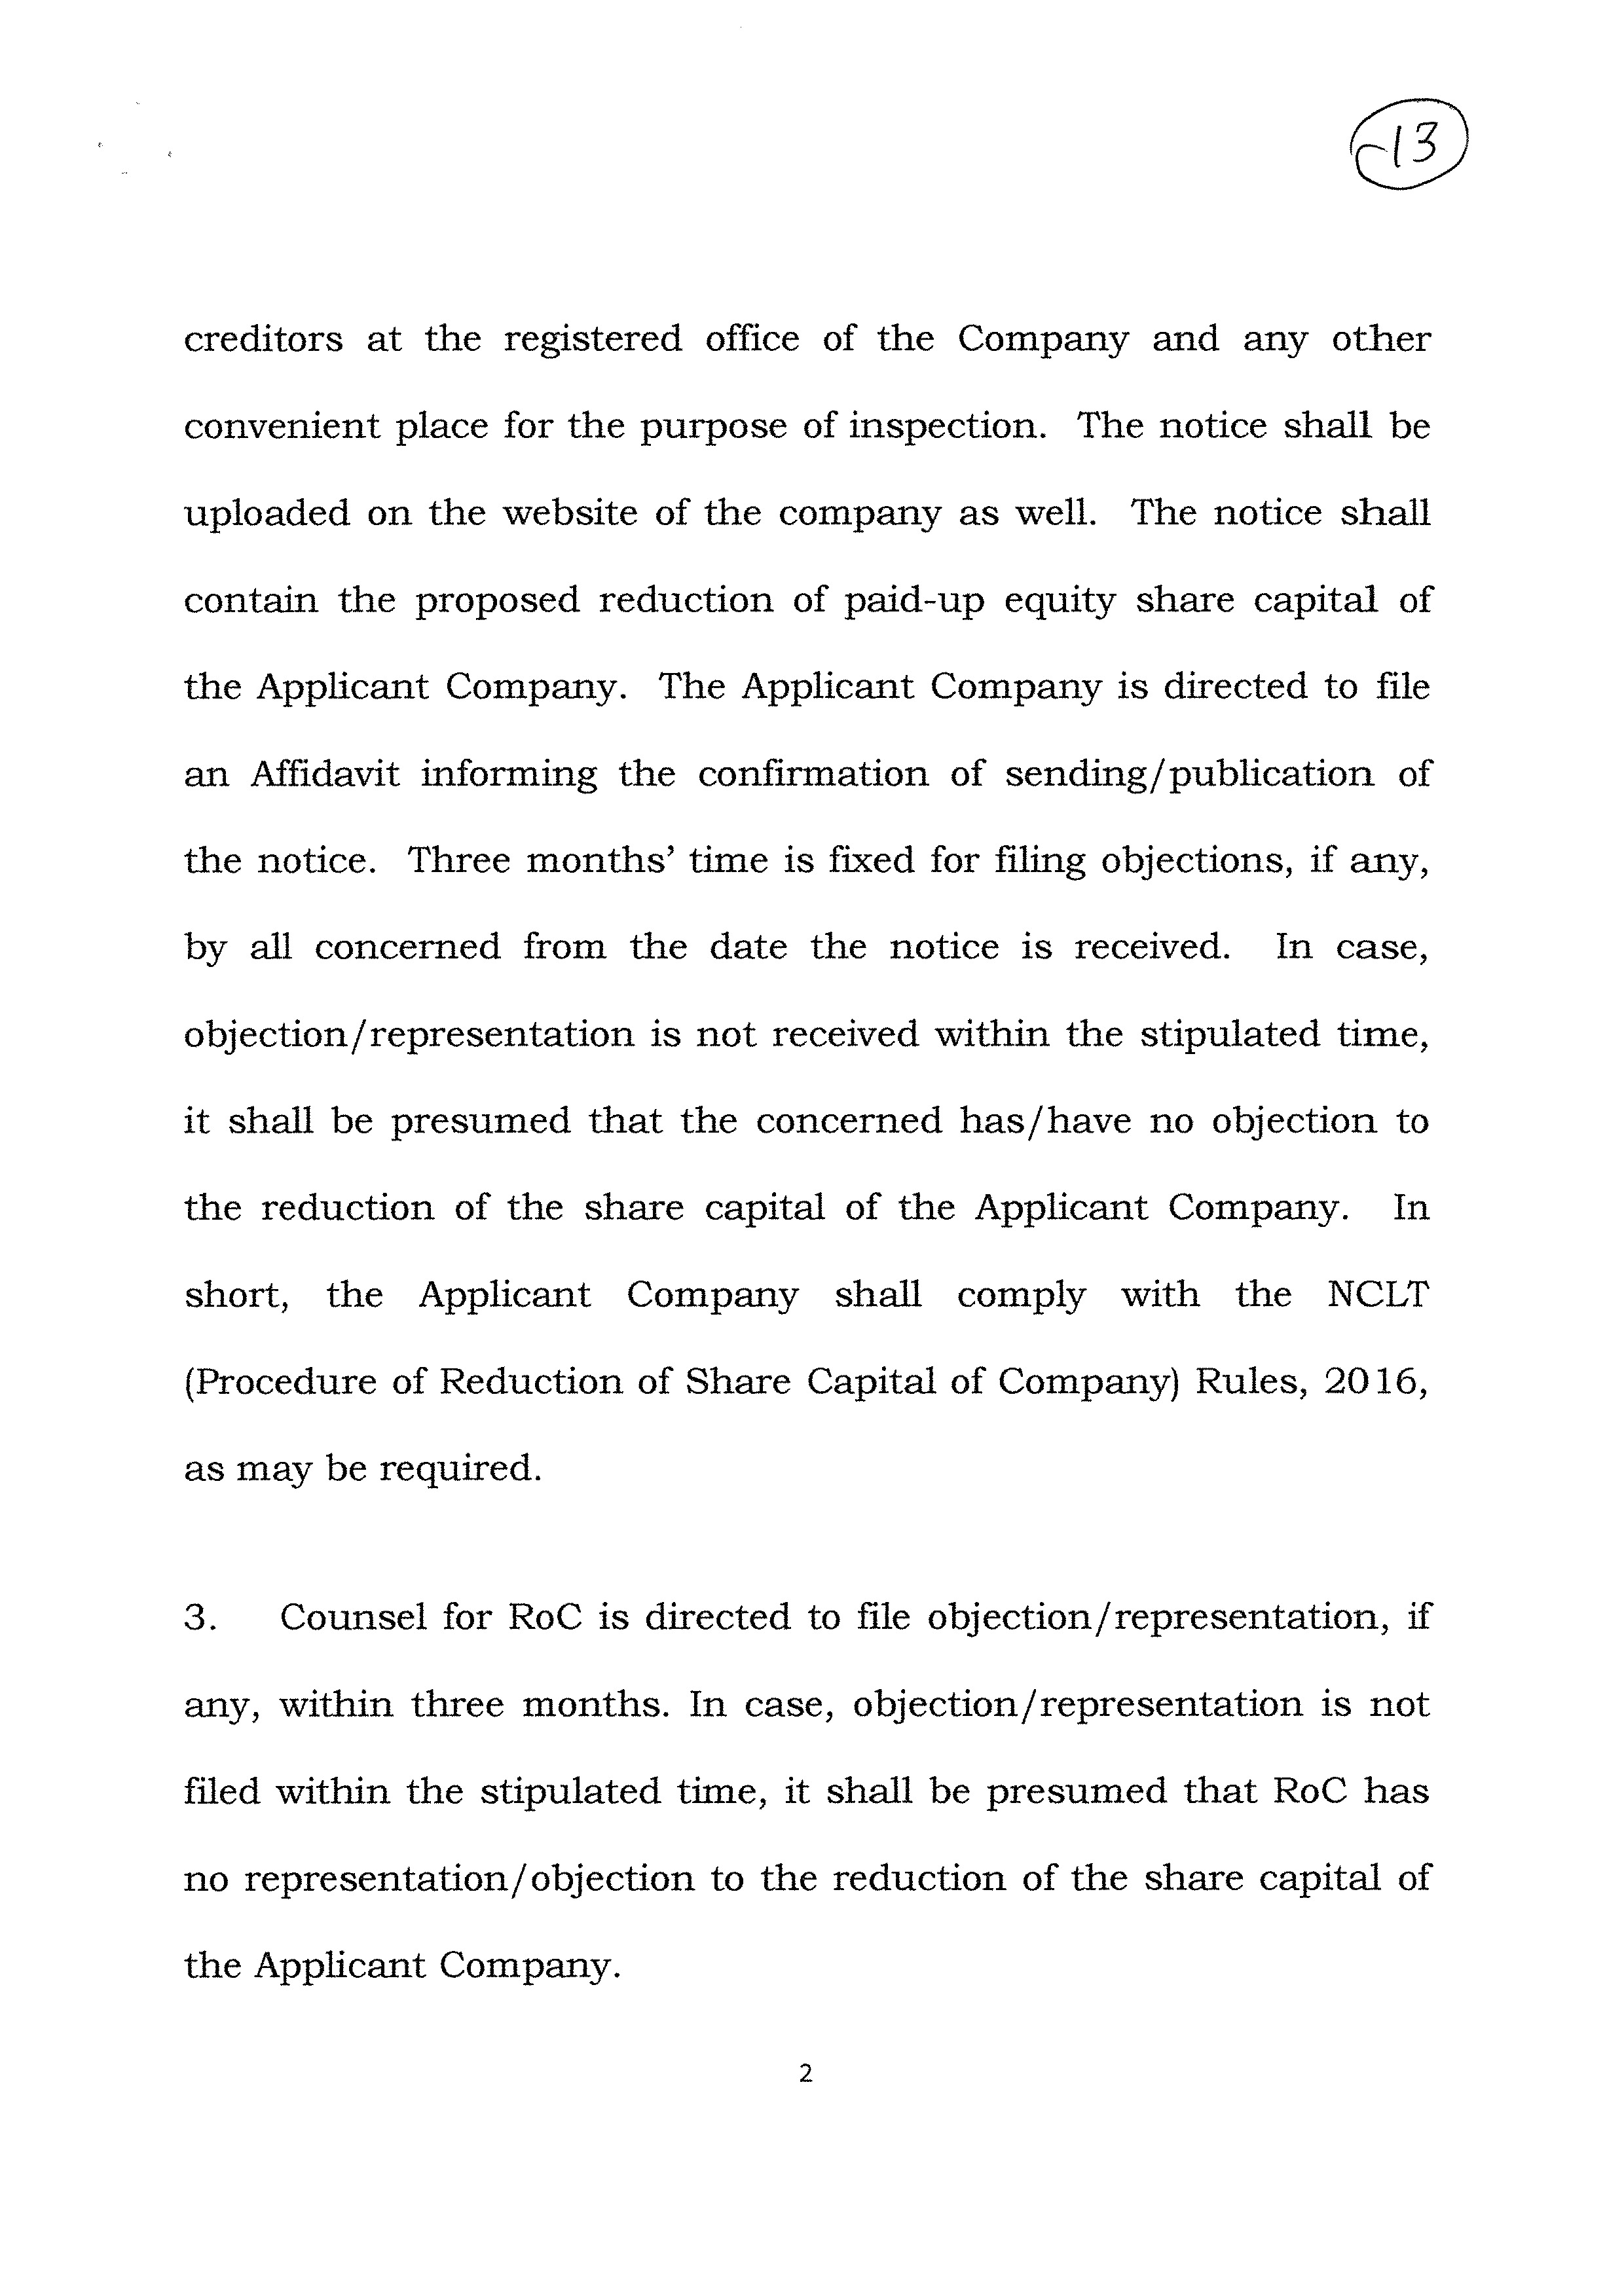 CP 1498 - NCLT Directions - 29012019 _Page_3